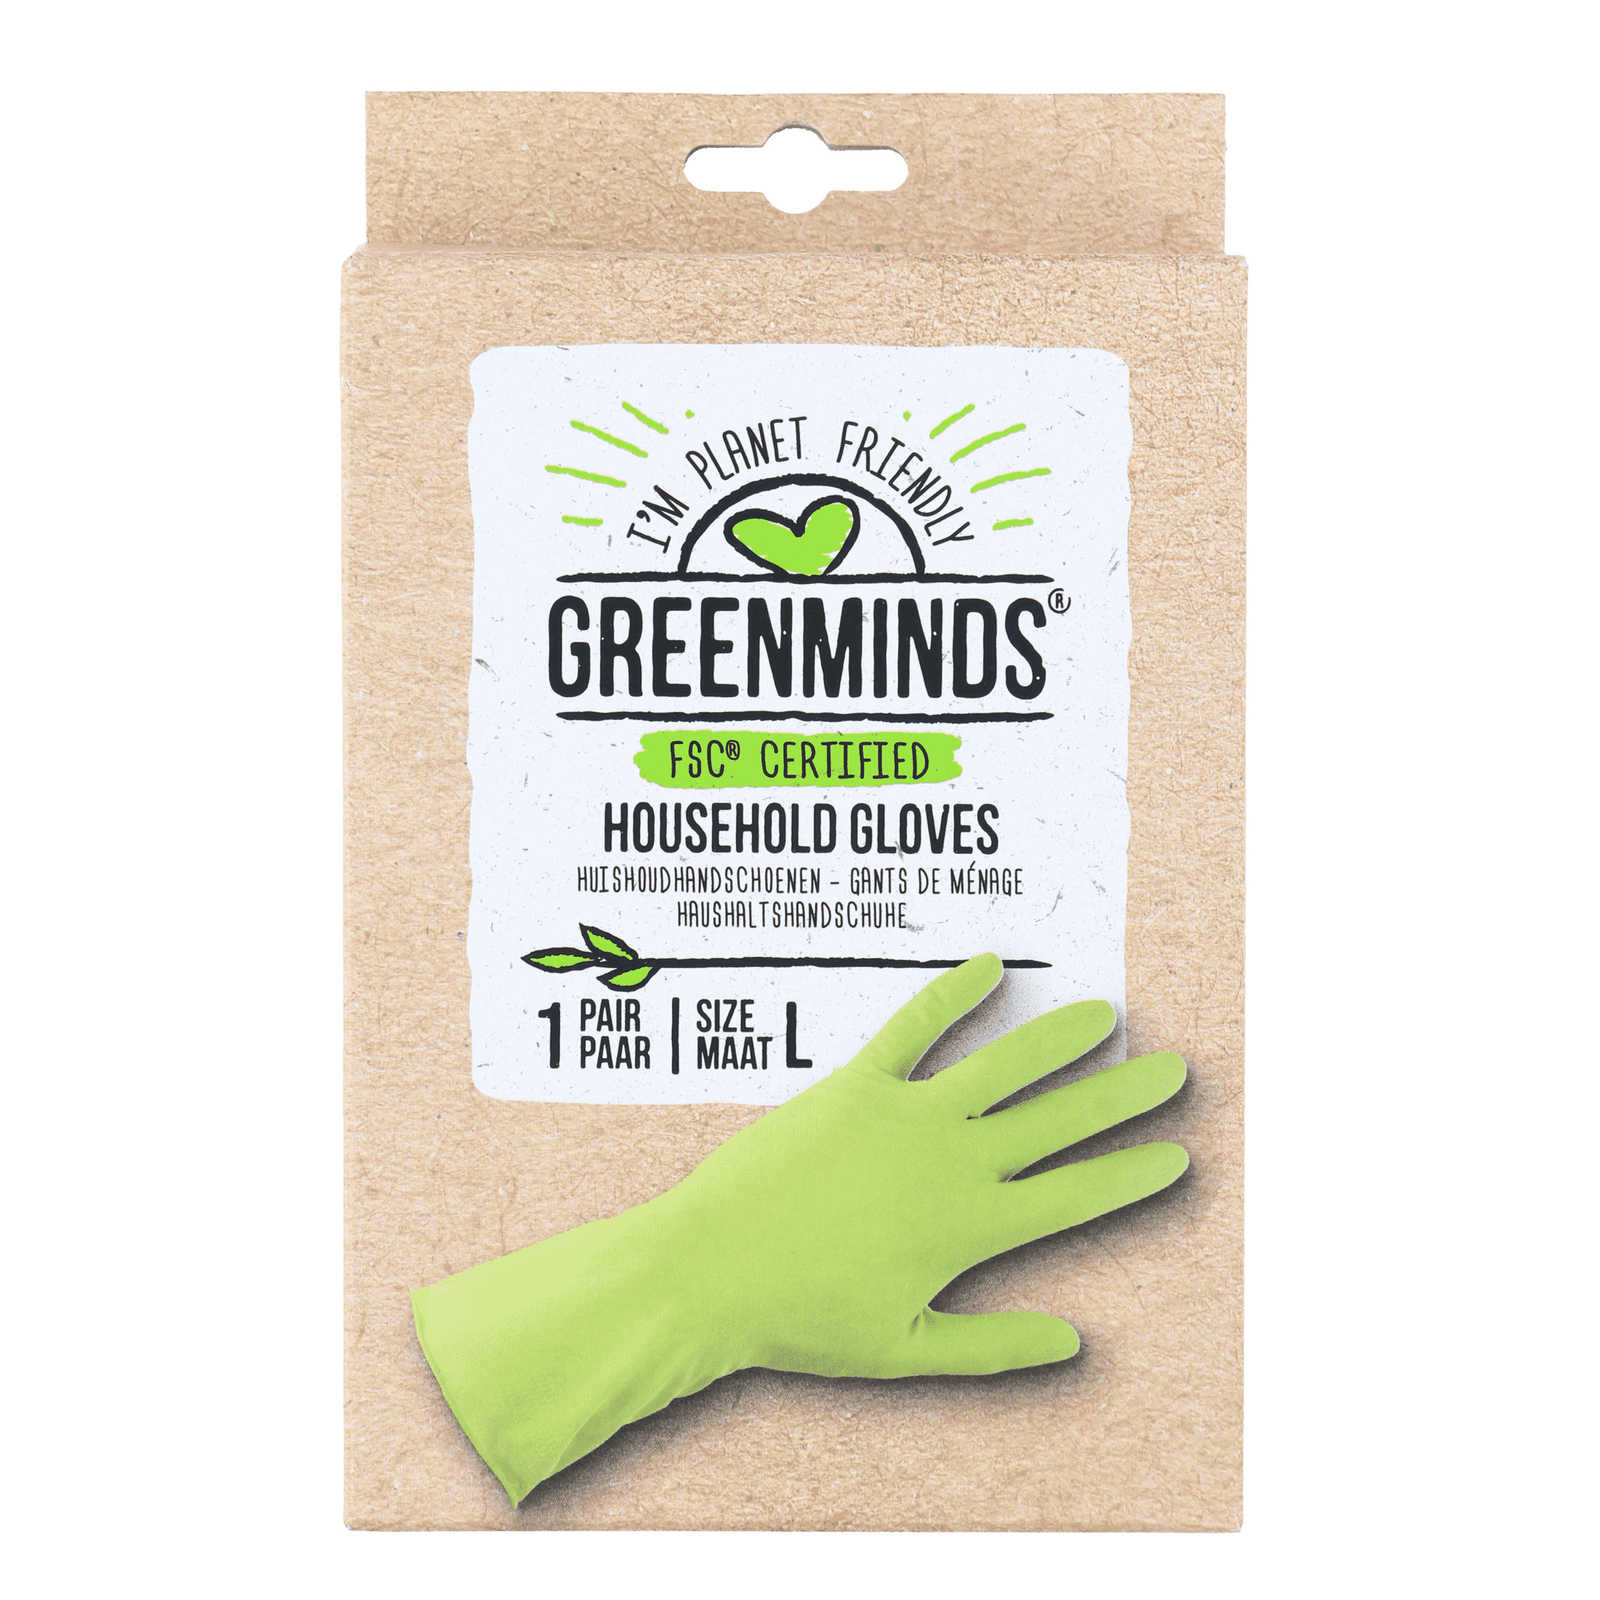 Greenminds